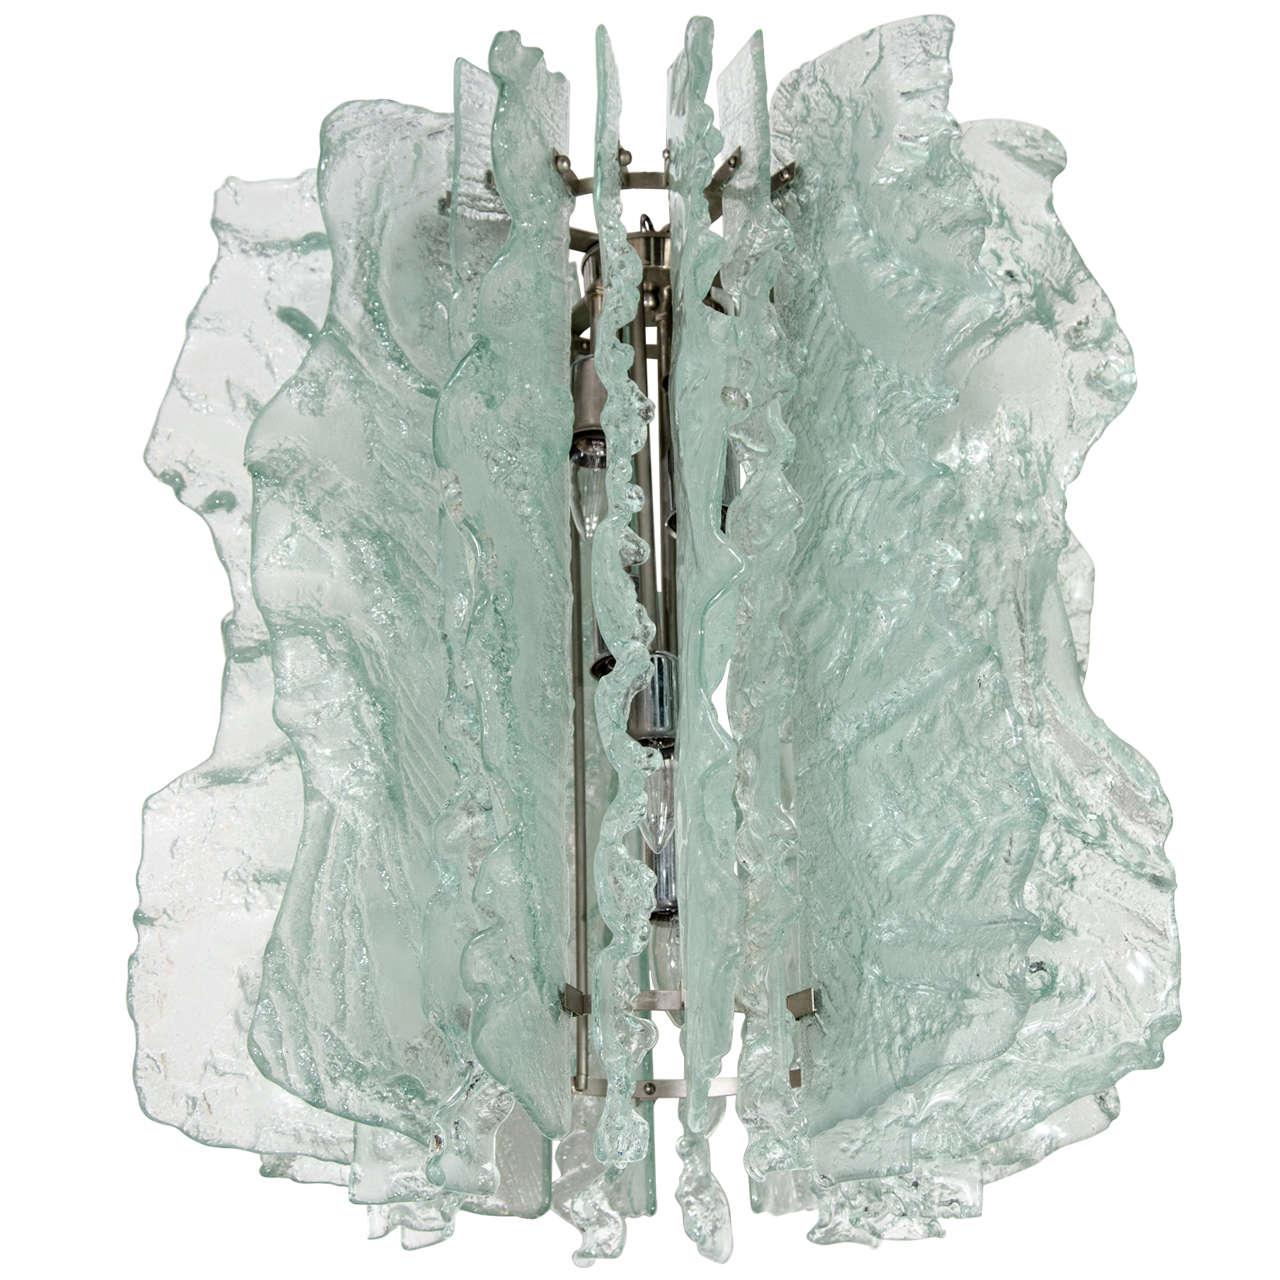 Spectacular Israeli chandelier comprised of handblown relief glass plates. The glass plates are textured and have fossilized leaf prints or formations. There are 24 glass plates, all with individual free-form shapes. They alternate between large